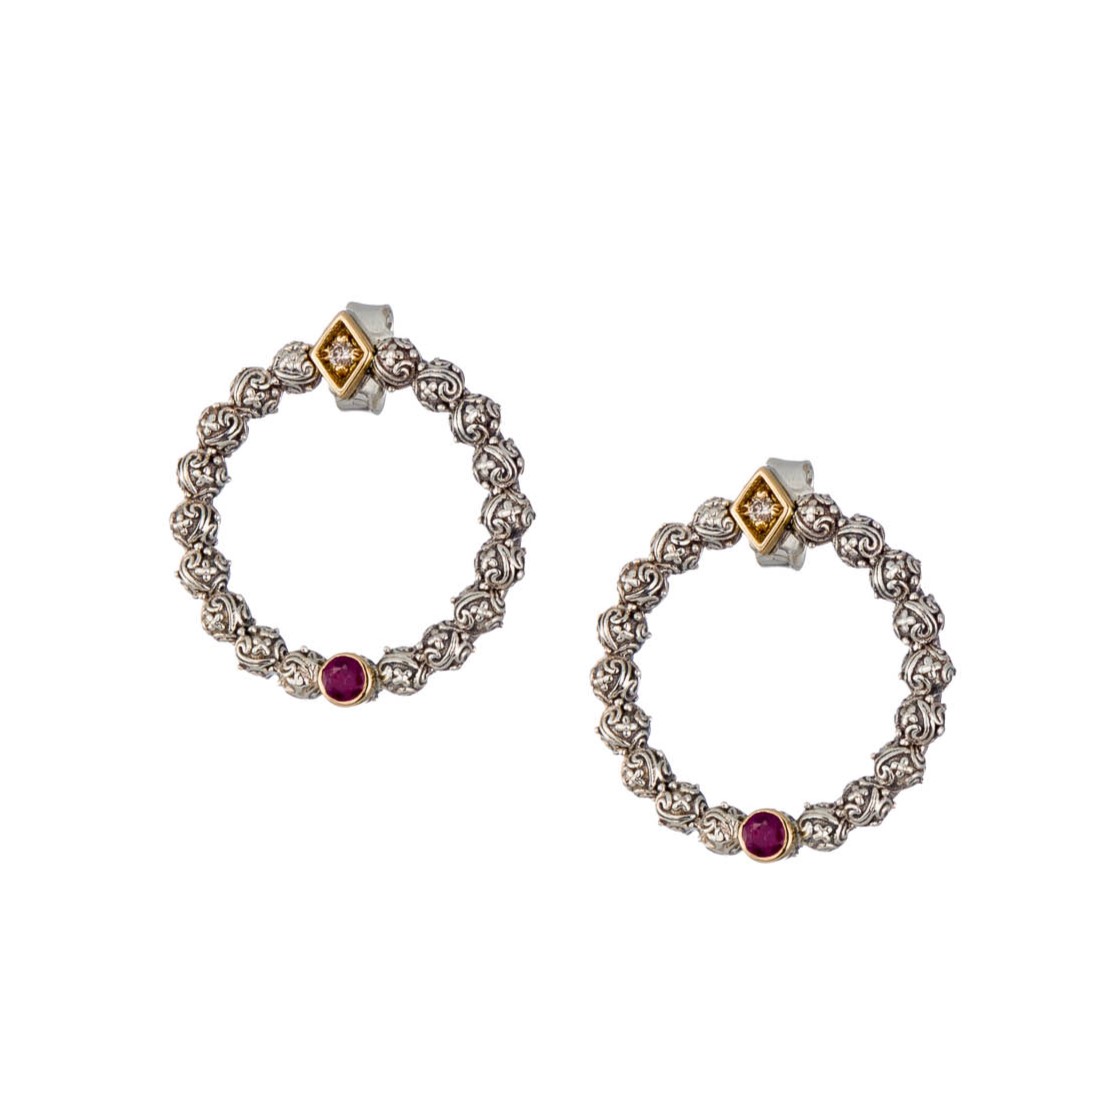 Eve stud circle earrings in 18K Gold and sterling silver with Gemstones